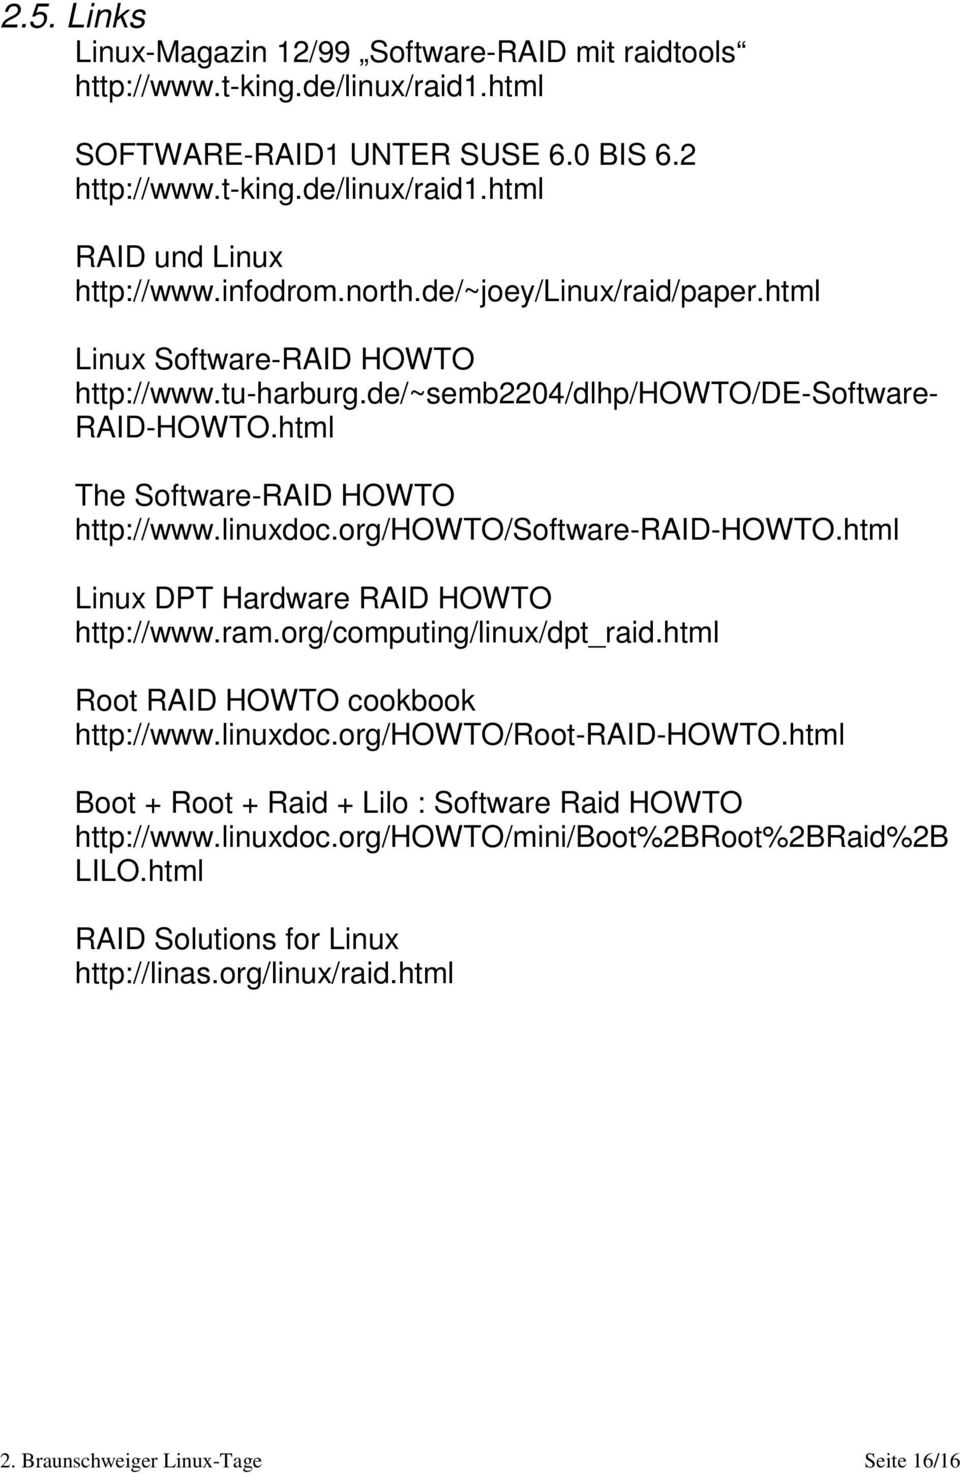 org/howto/software-raid-howto.html Linux DPT Hardware RAID HOWTO http://www.ram.org/computing/linux/dpt_raid.html Root RAID HOWTO cookbook http://www.linuxdoc.org/howto/root-raid-howto.